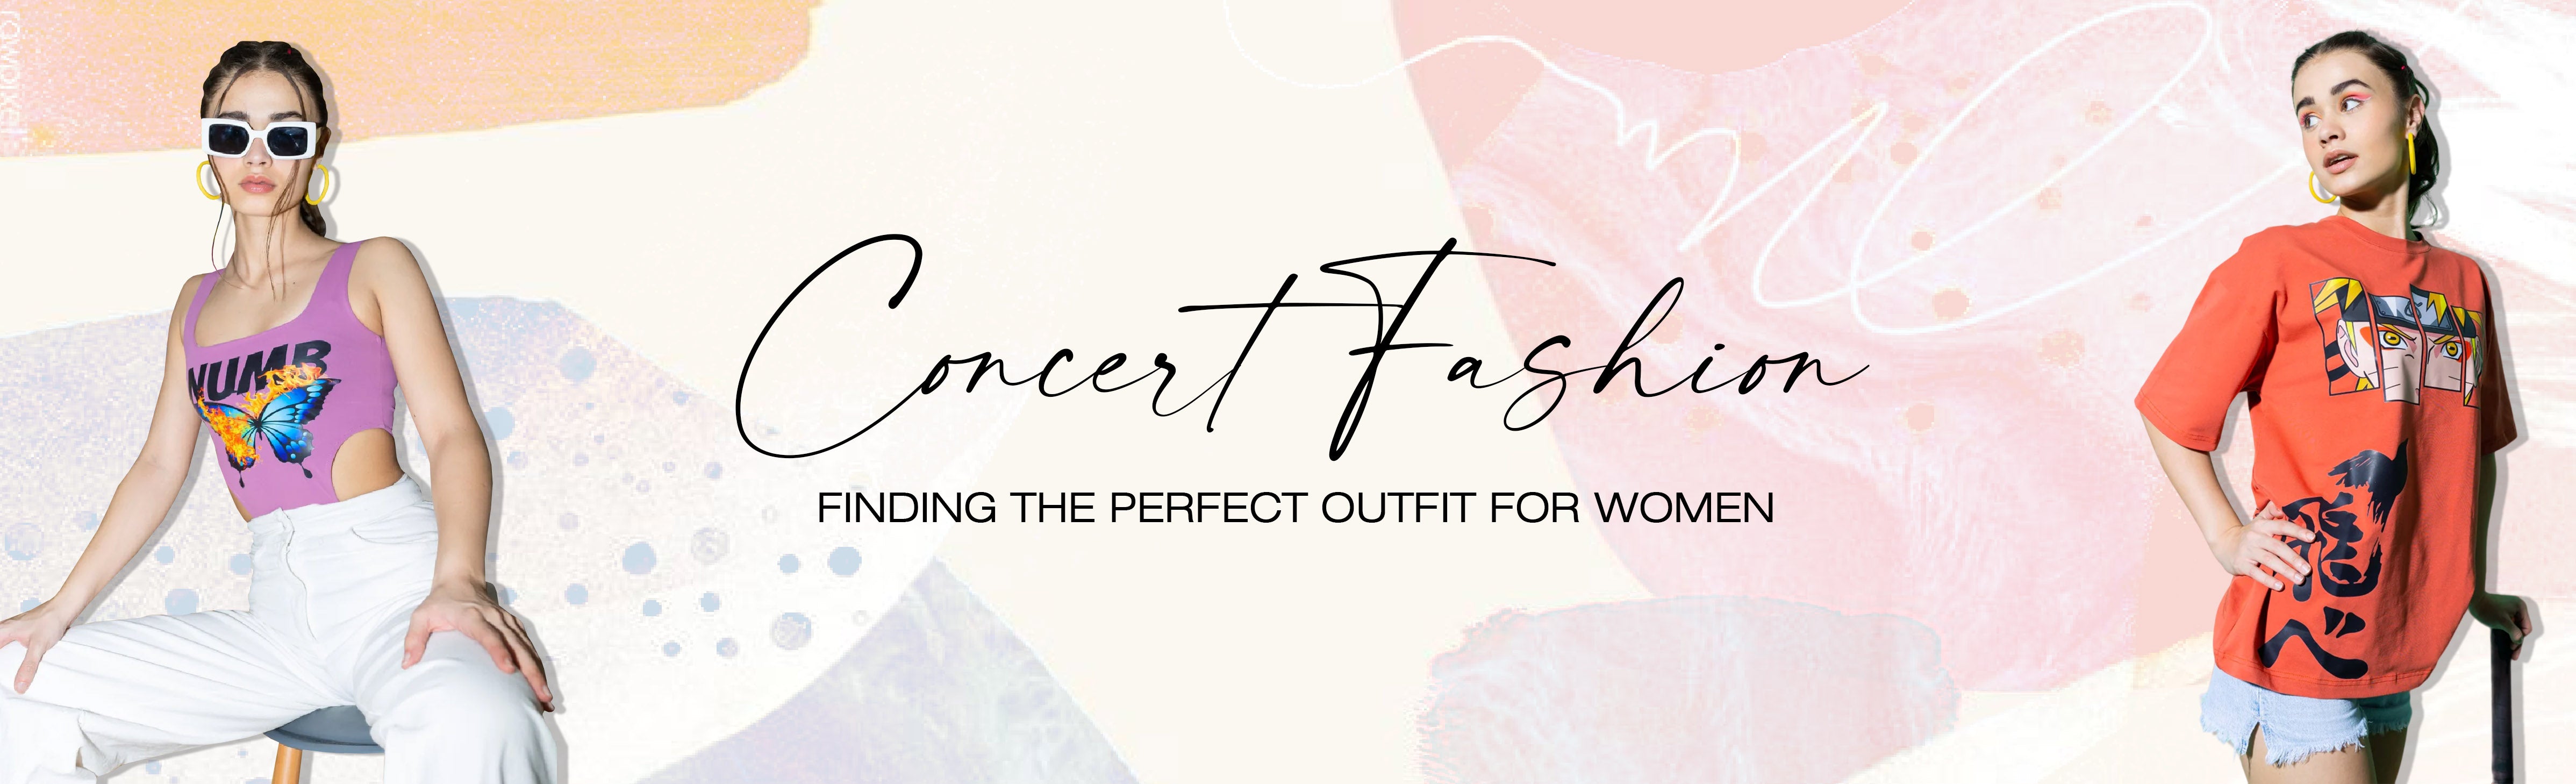 Concert Fashion: Finding the Perfect Outfit for Women